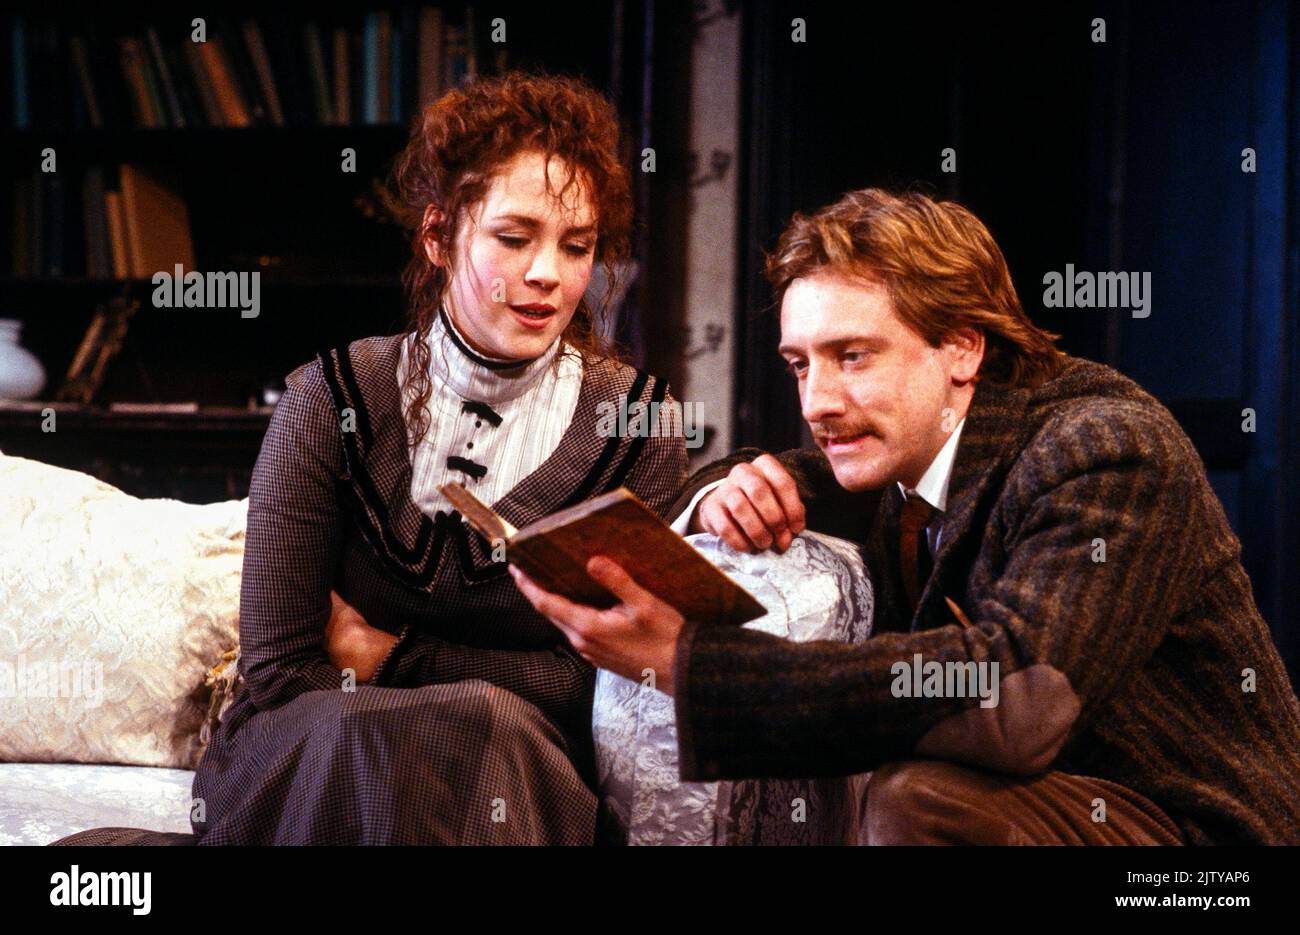 Claire Hackett (Maggie), Neil Dudgeon (Ernest Lambert) in A COLLIER'S FRIDAY NIGHT by D.H. Lawrence at the  Greenwich Theatre, London SE10 26/10/1987  design: Kenny Miller  lighting: Gerry Jenkinson  director: John Dove Stock Photo